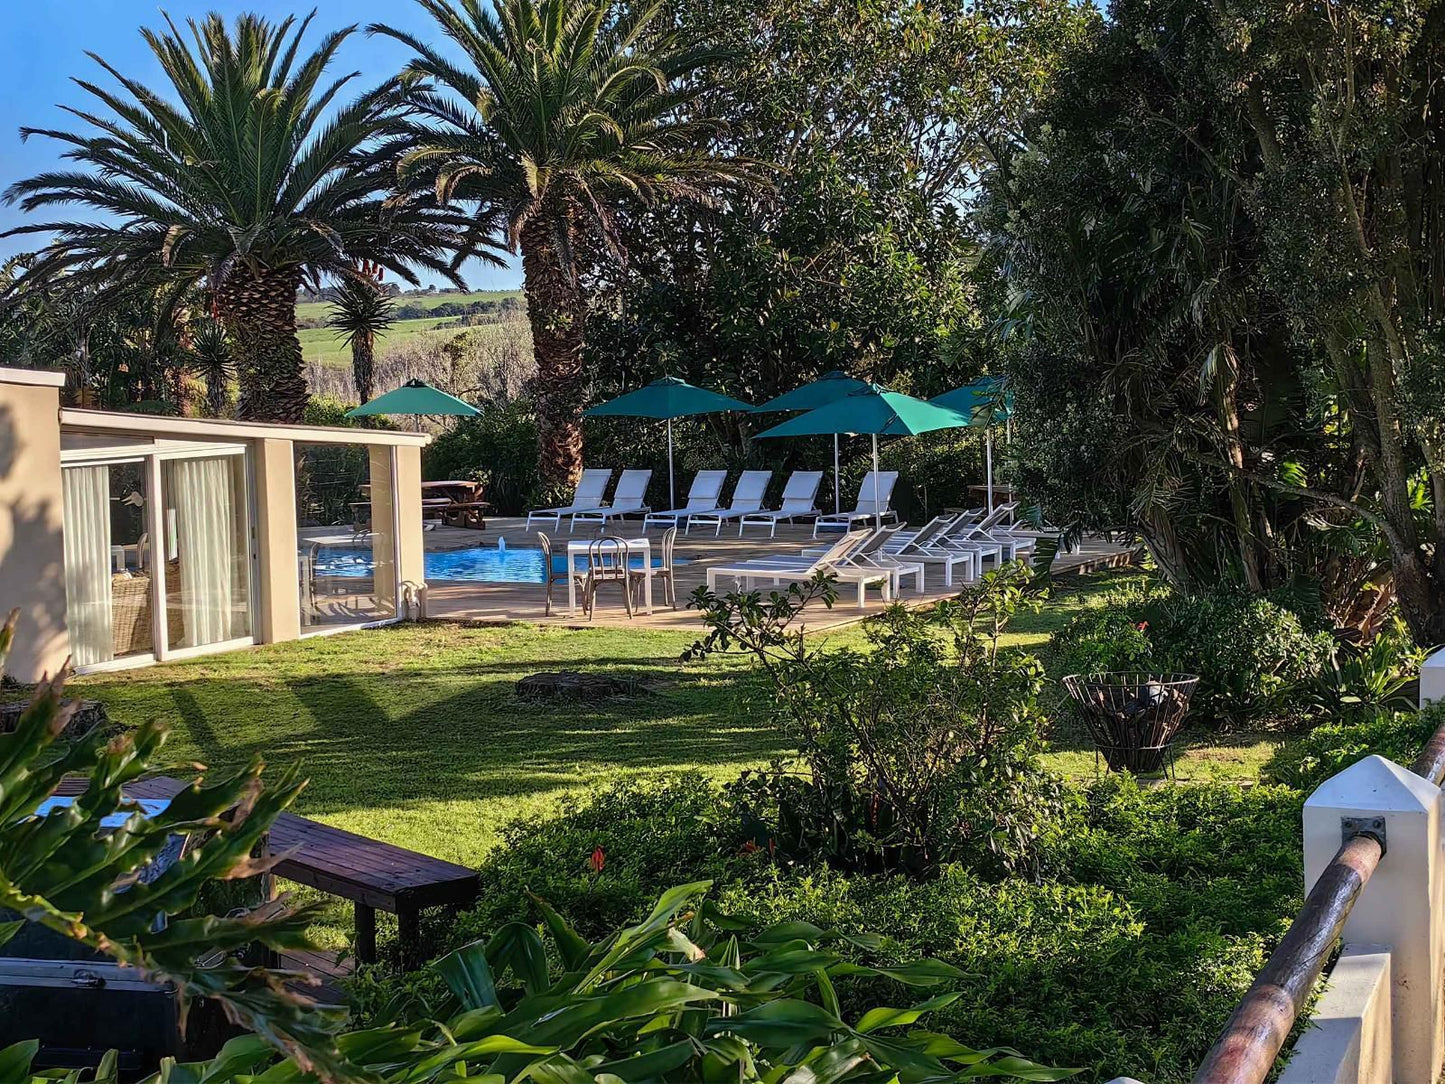 Oyster Bay Lodge Oyster Bay Eastern Cape South Africa House, Building, Architecture, Palm Tree, Plant, Nature, Wood, Garden, Swimming Pool